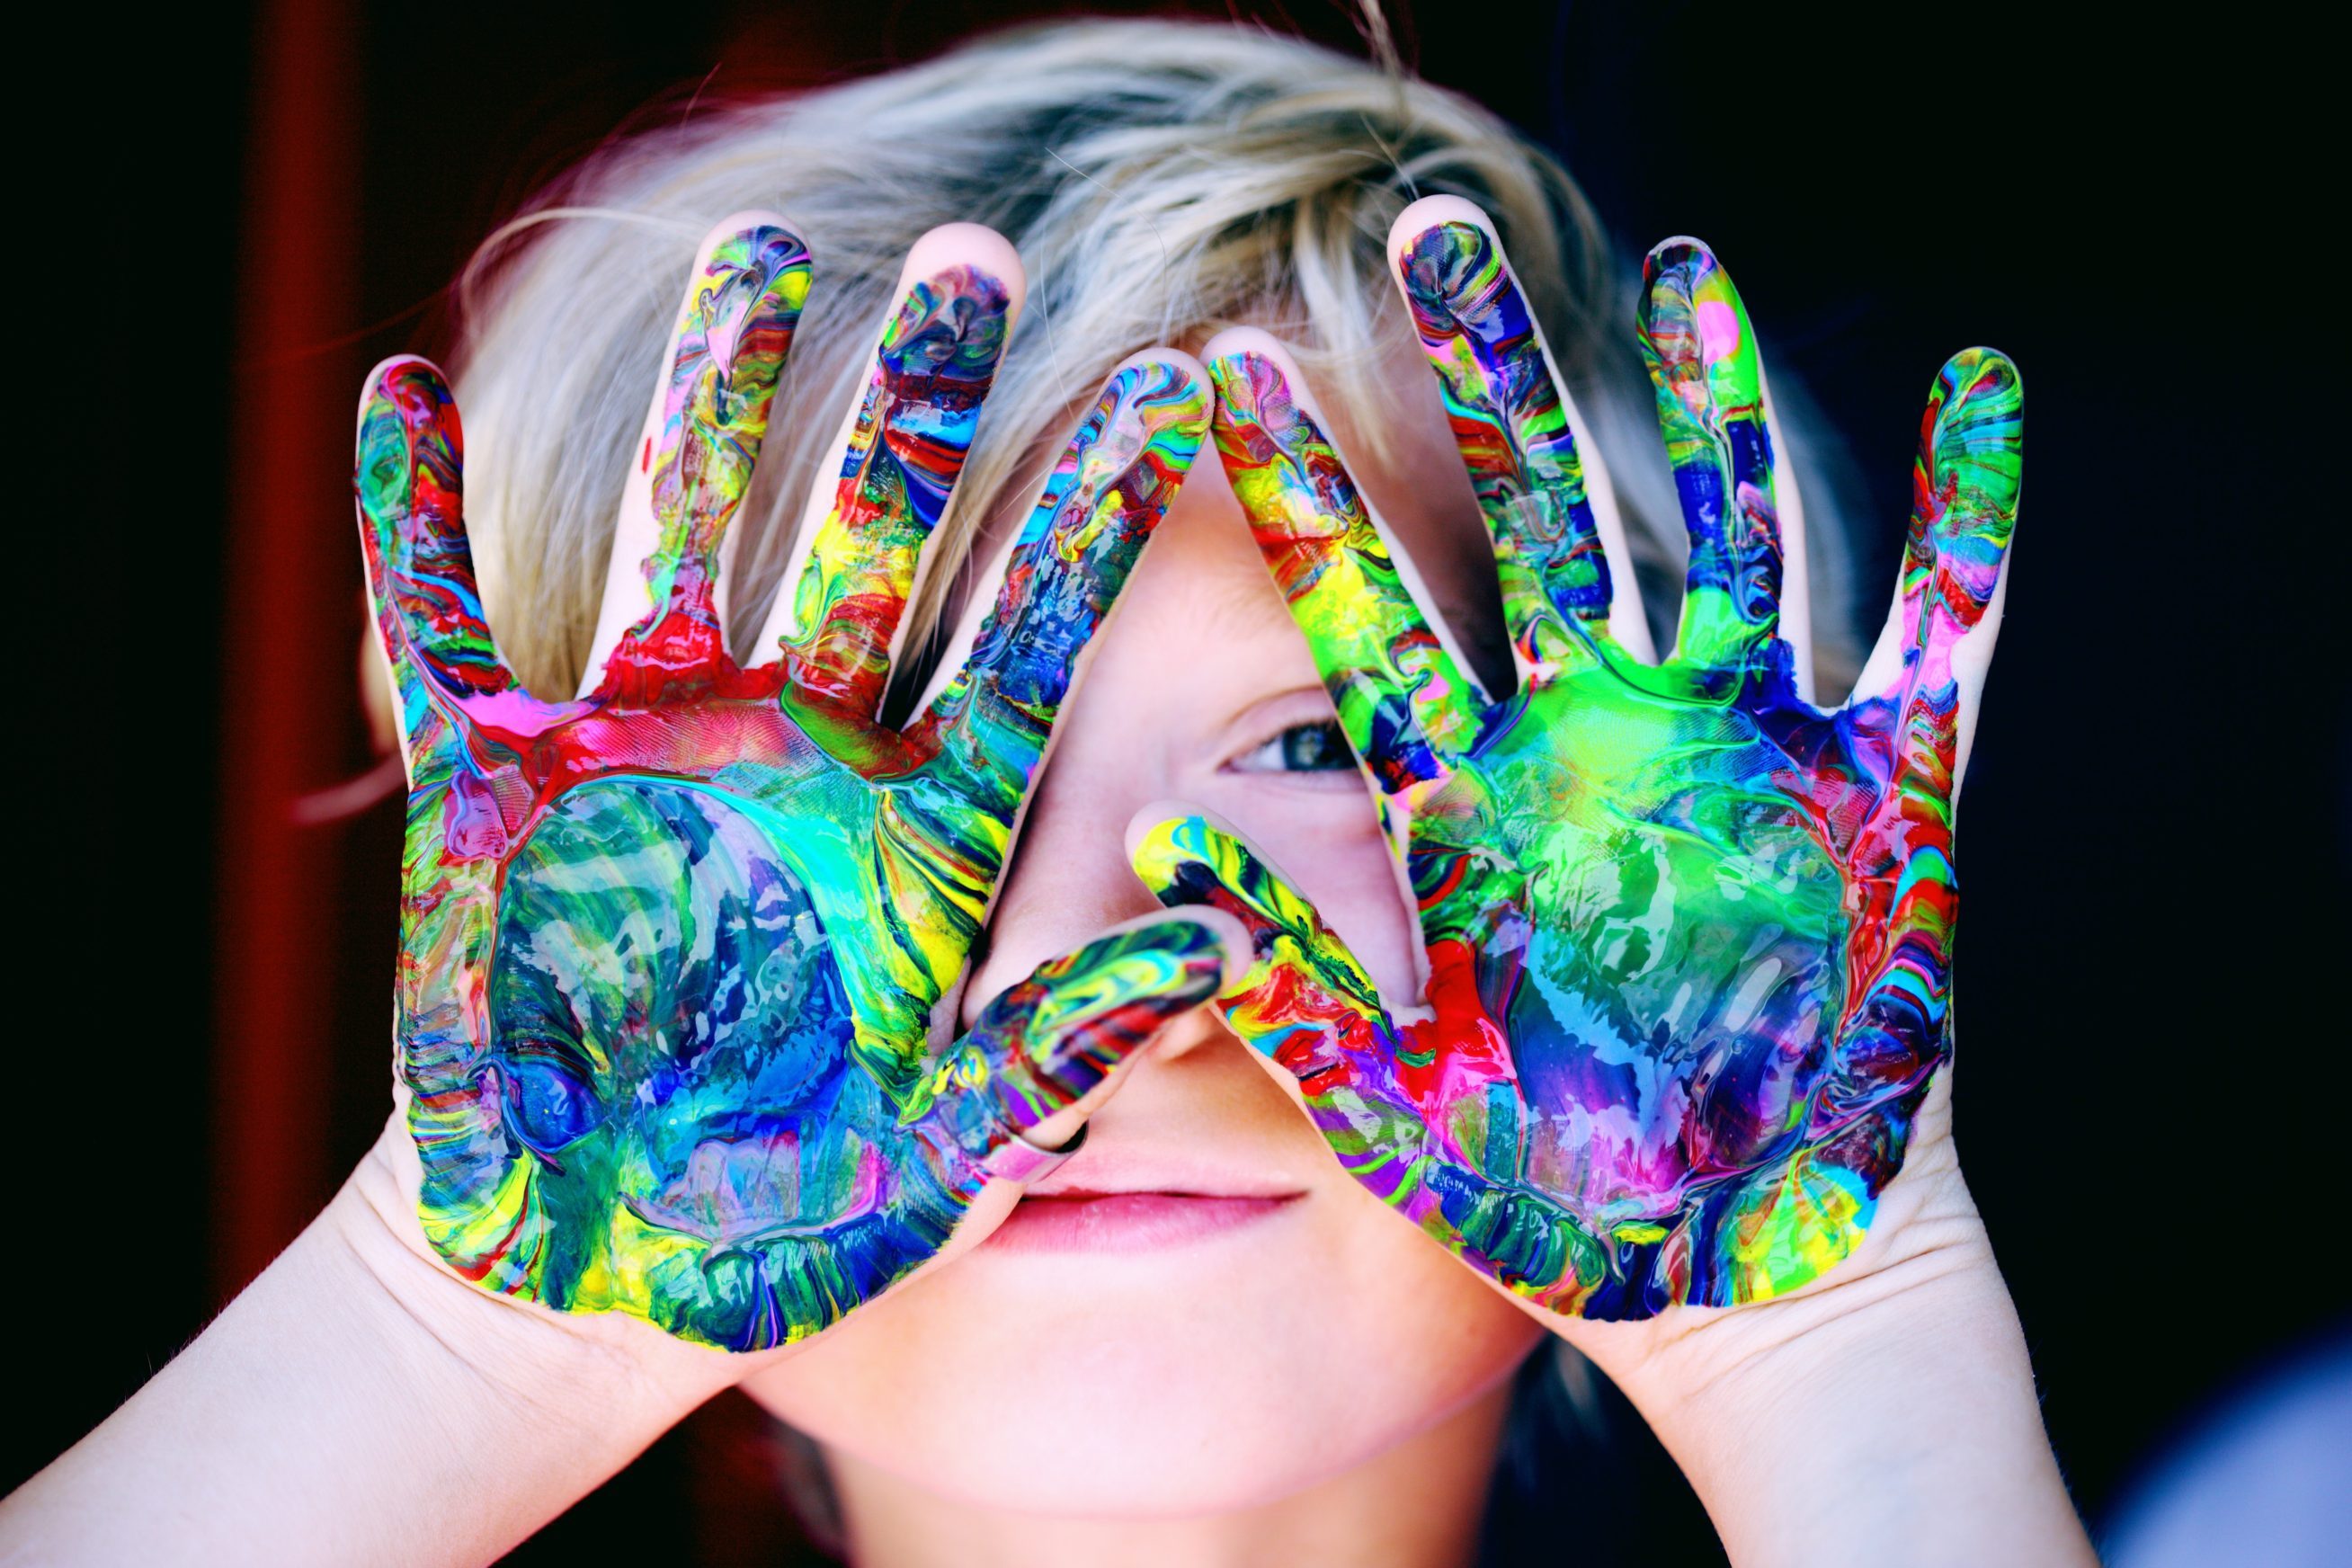 IS IT POSSIBLE TO TEACH OUR KIDS TO BE CREATIVE?